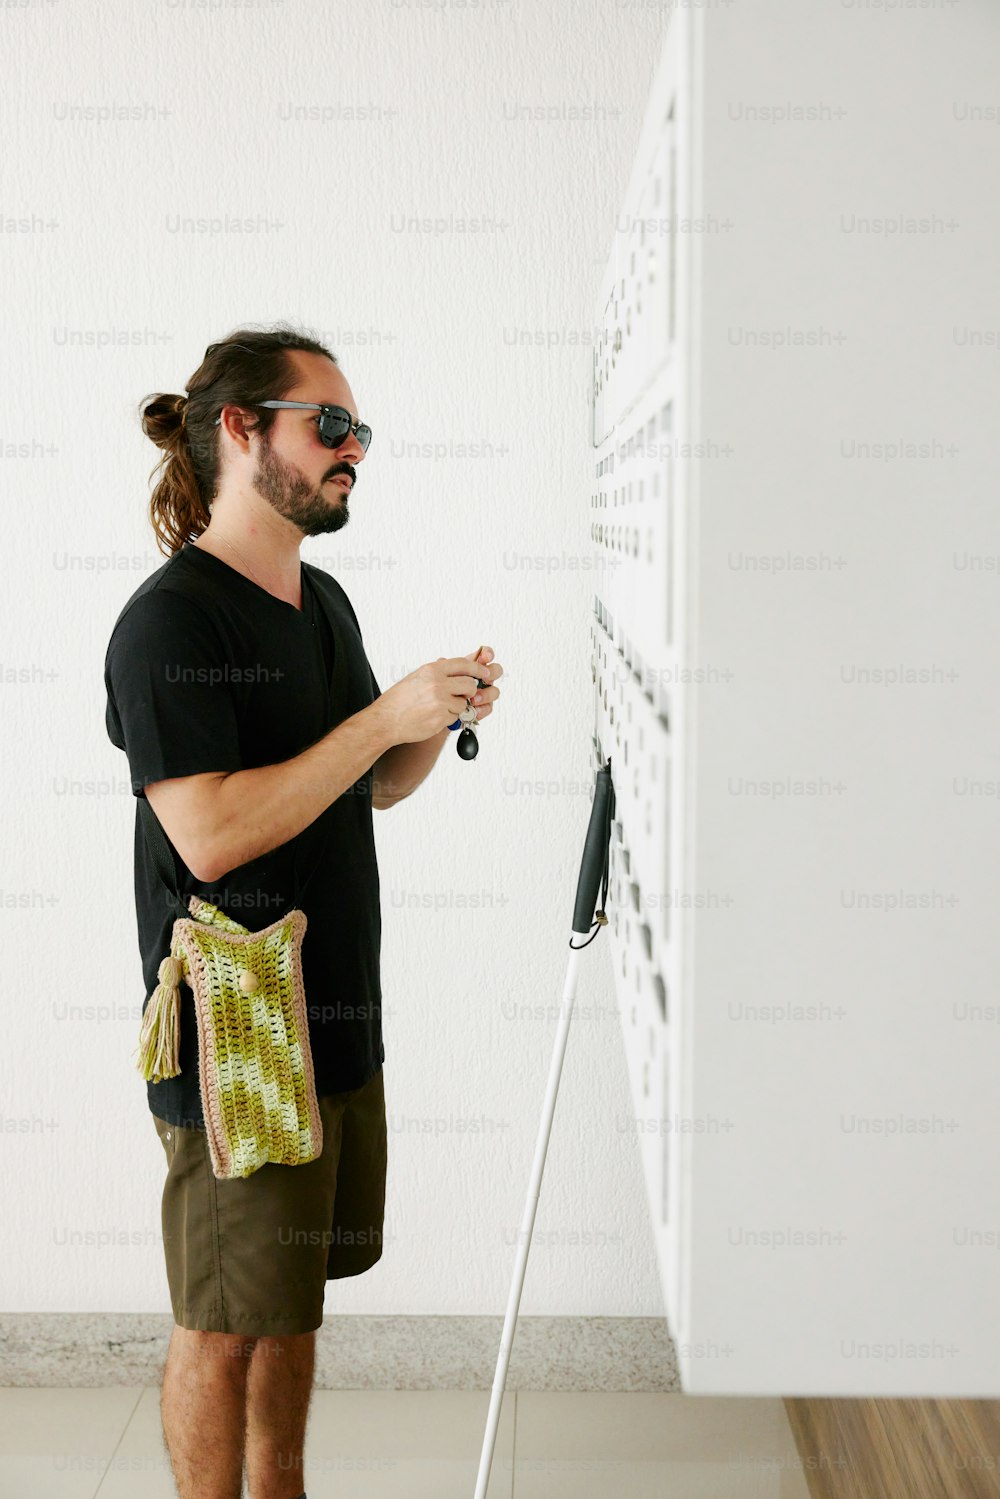 a man standing in front of a white board